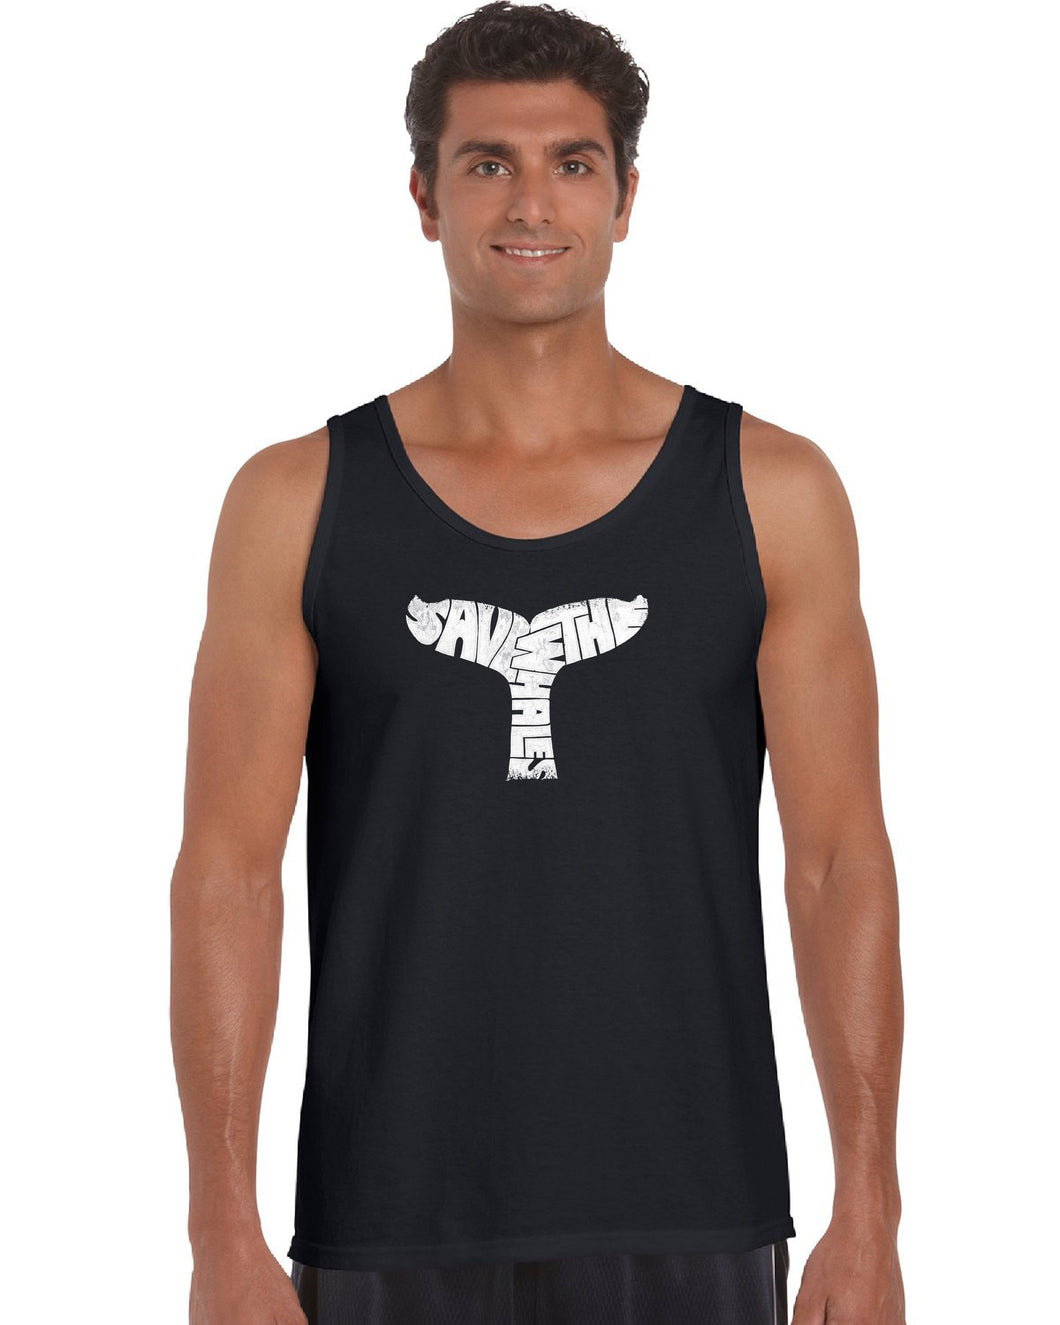 SAVE THE WHALES - Men's Word Art Tank Top